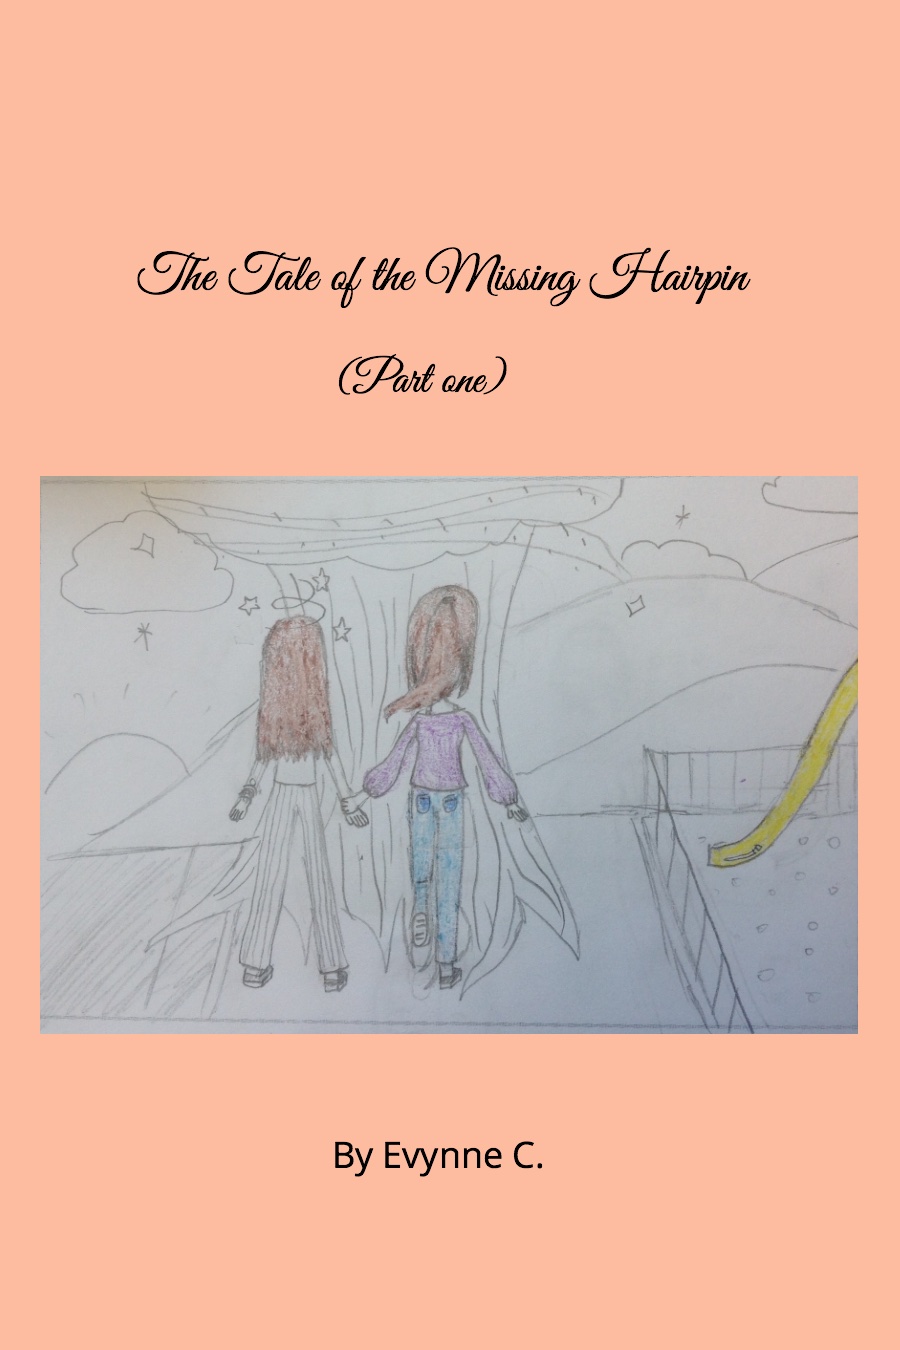 The Tale of the Missing Hairpin by Evynne C